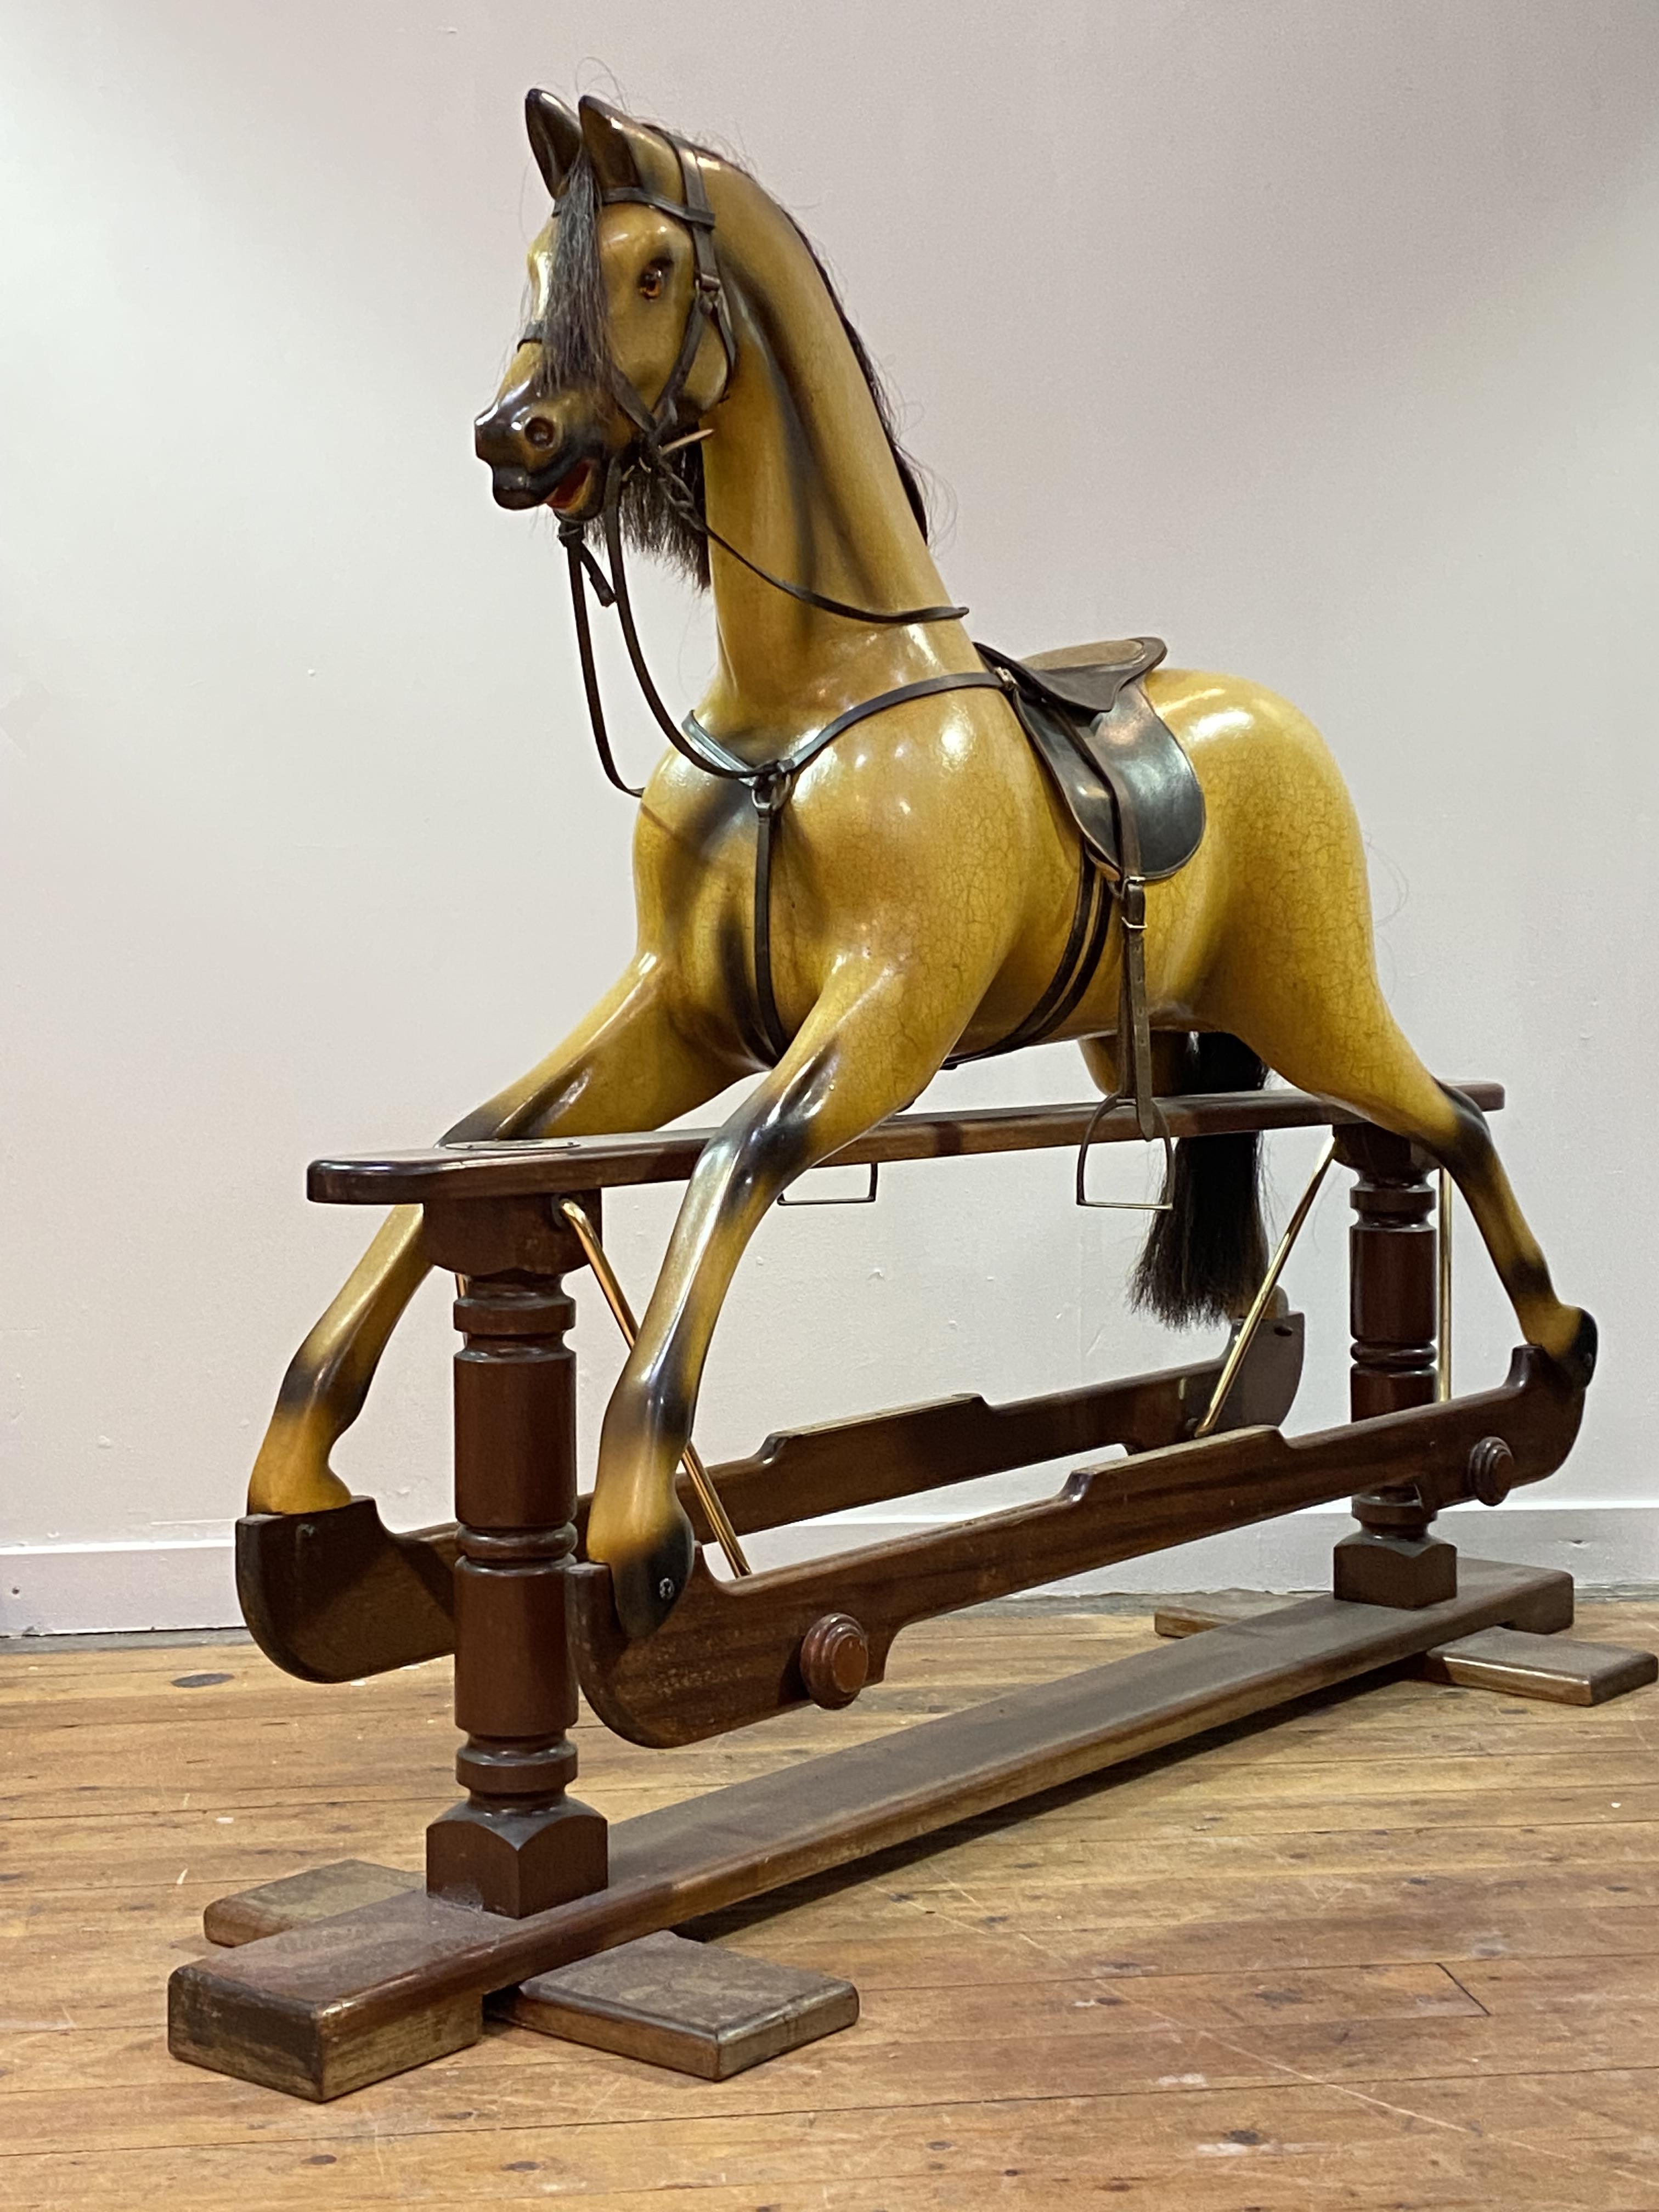 A Whittingham Crafts Ltd. carved and painted wooden trestle rocking horse, painted mustard, with